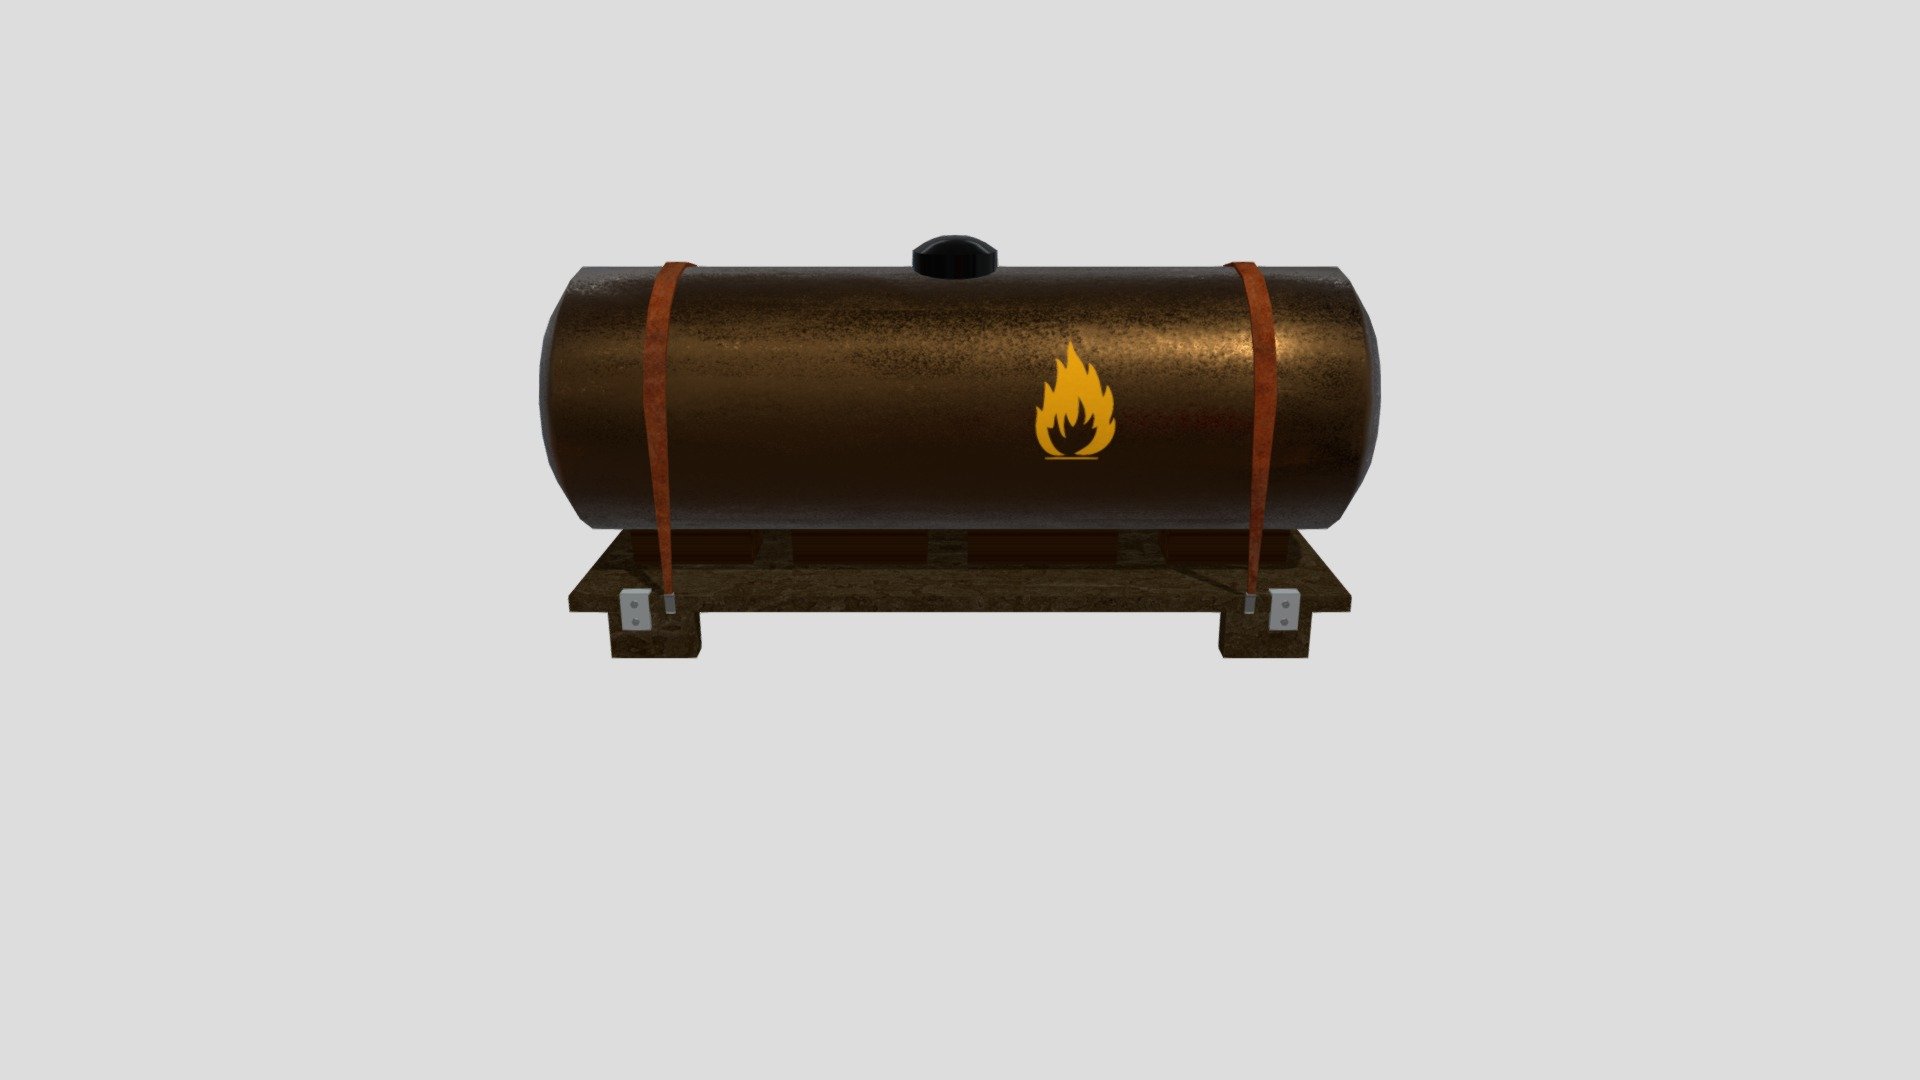 A gas tank a made for a game demo me and my team developed - Gas Tank - Download Free 3D model by Caleb Wheatley (@pateto) 3d model